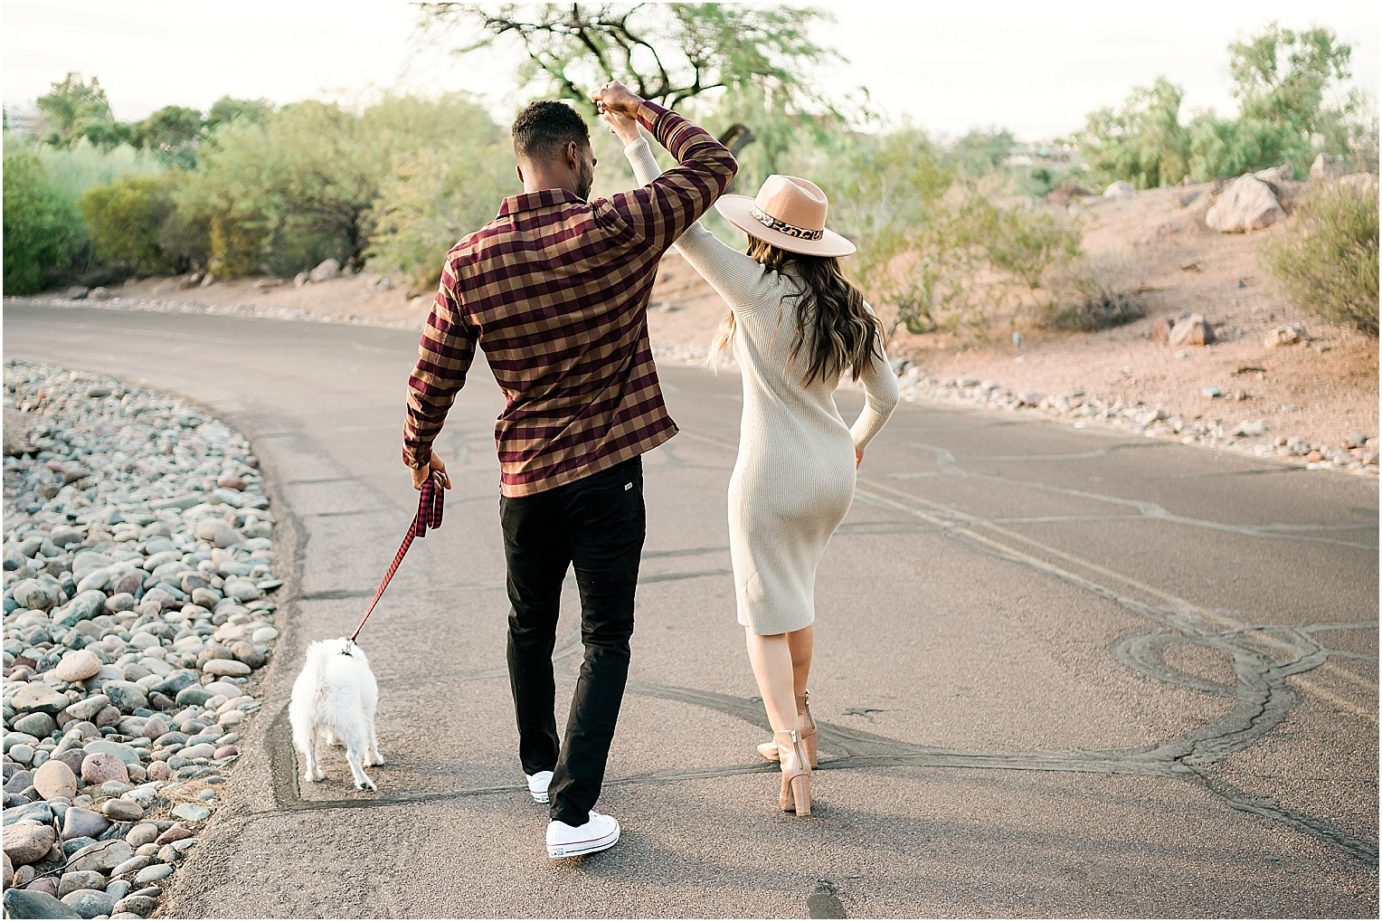 Desert engagement session tempe photographer Mansel and Rita couple walking by cactus